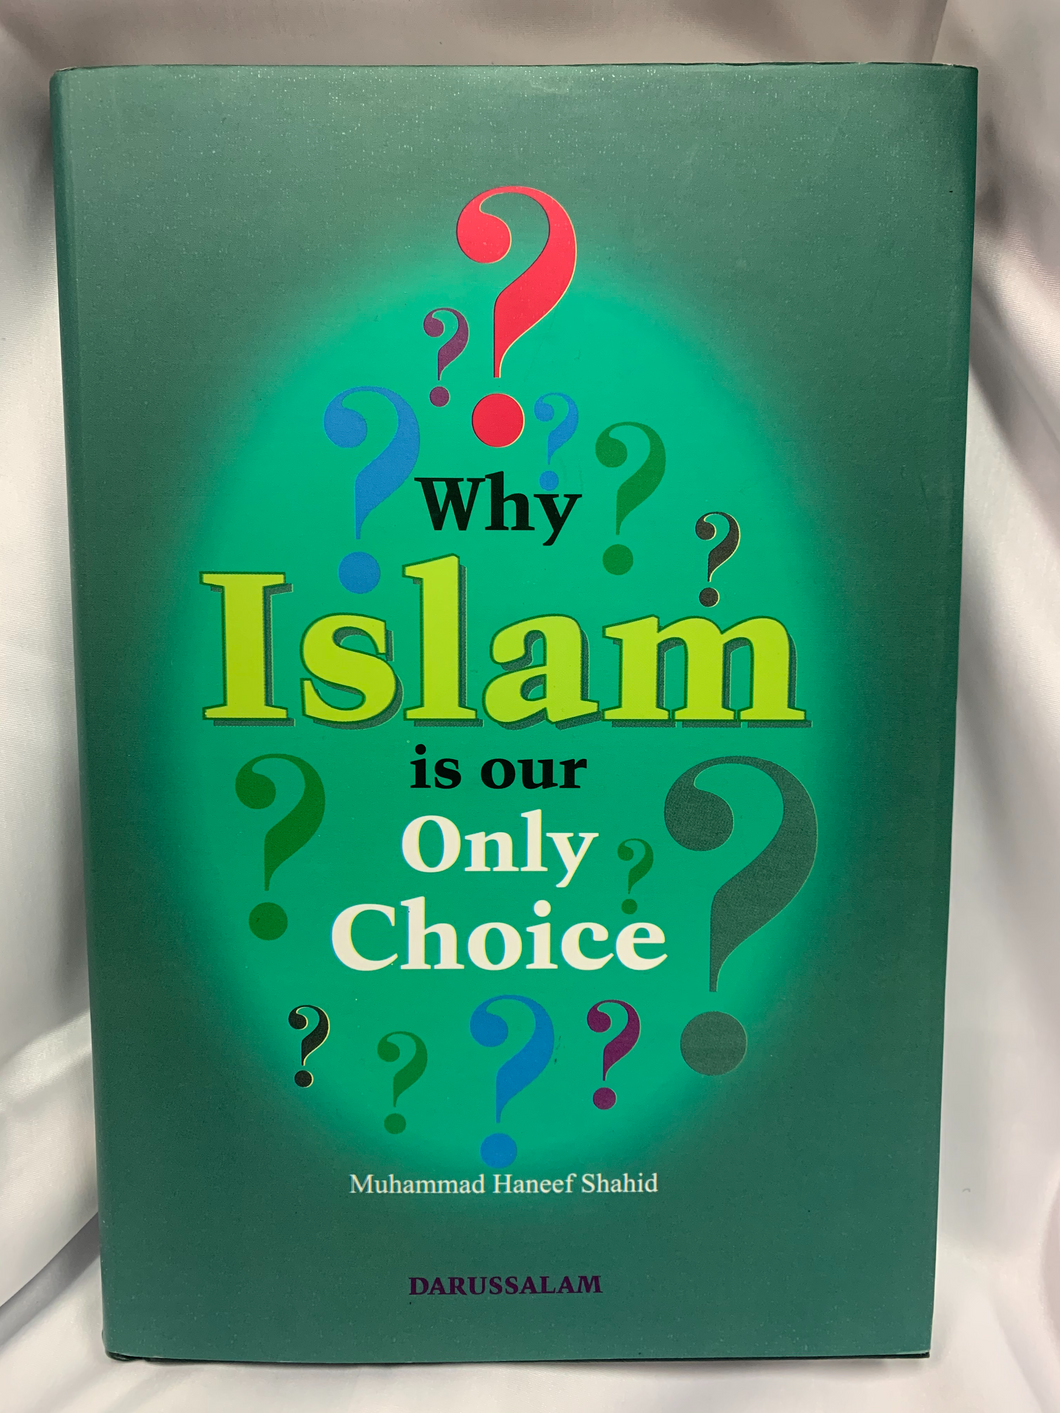 Why is Islam our only choice?